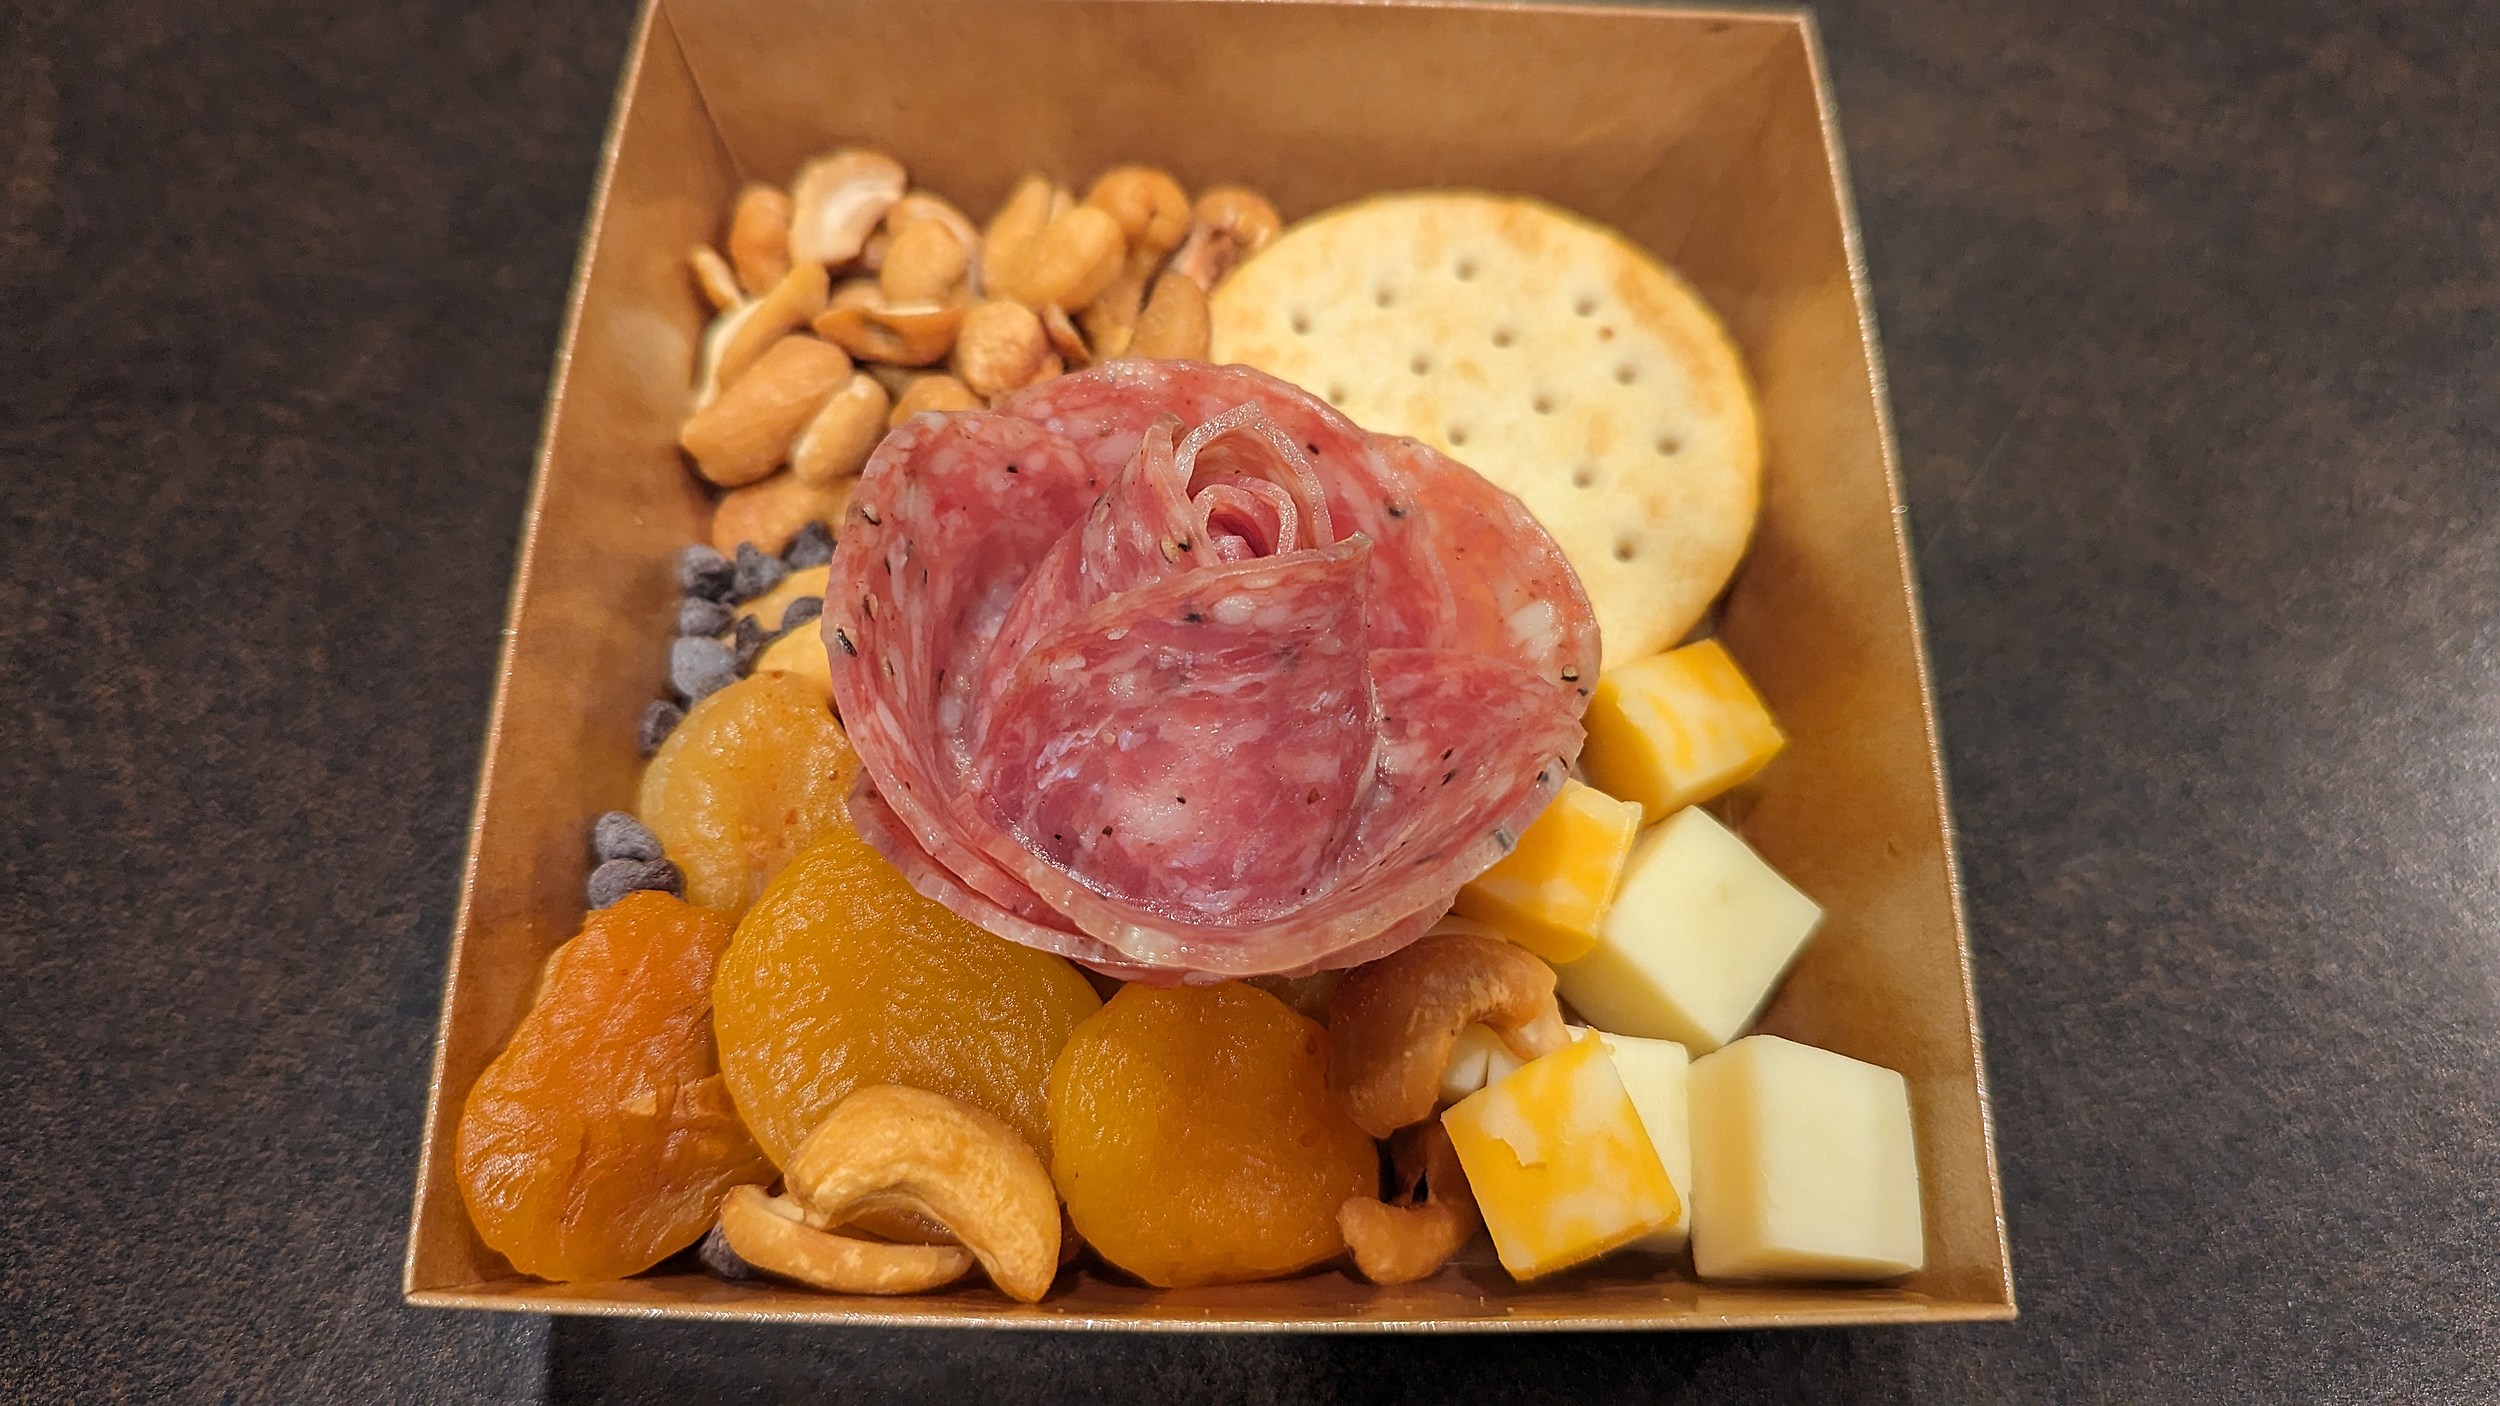 This $6 Charcuterie Box is My New Favorite Thing in Yakima pic